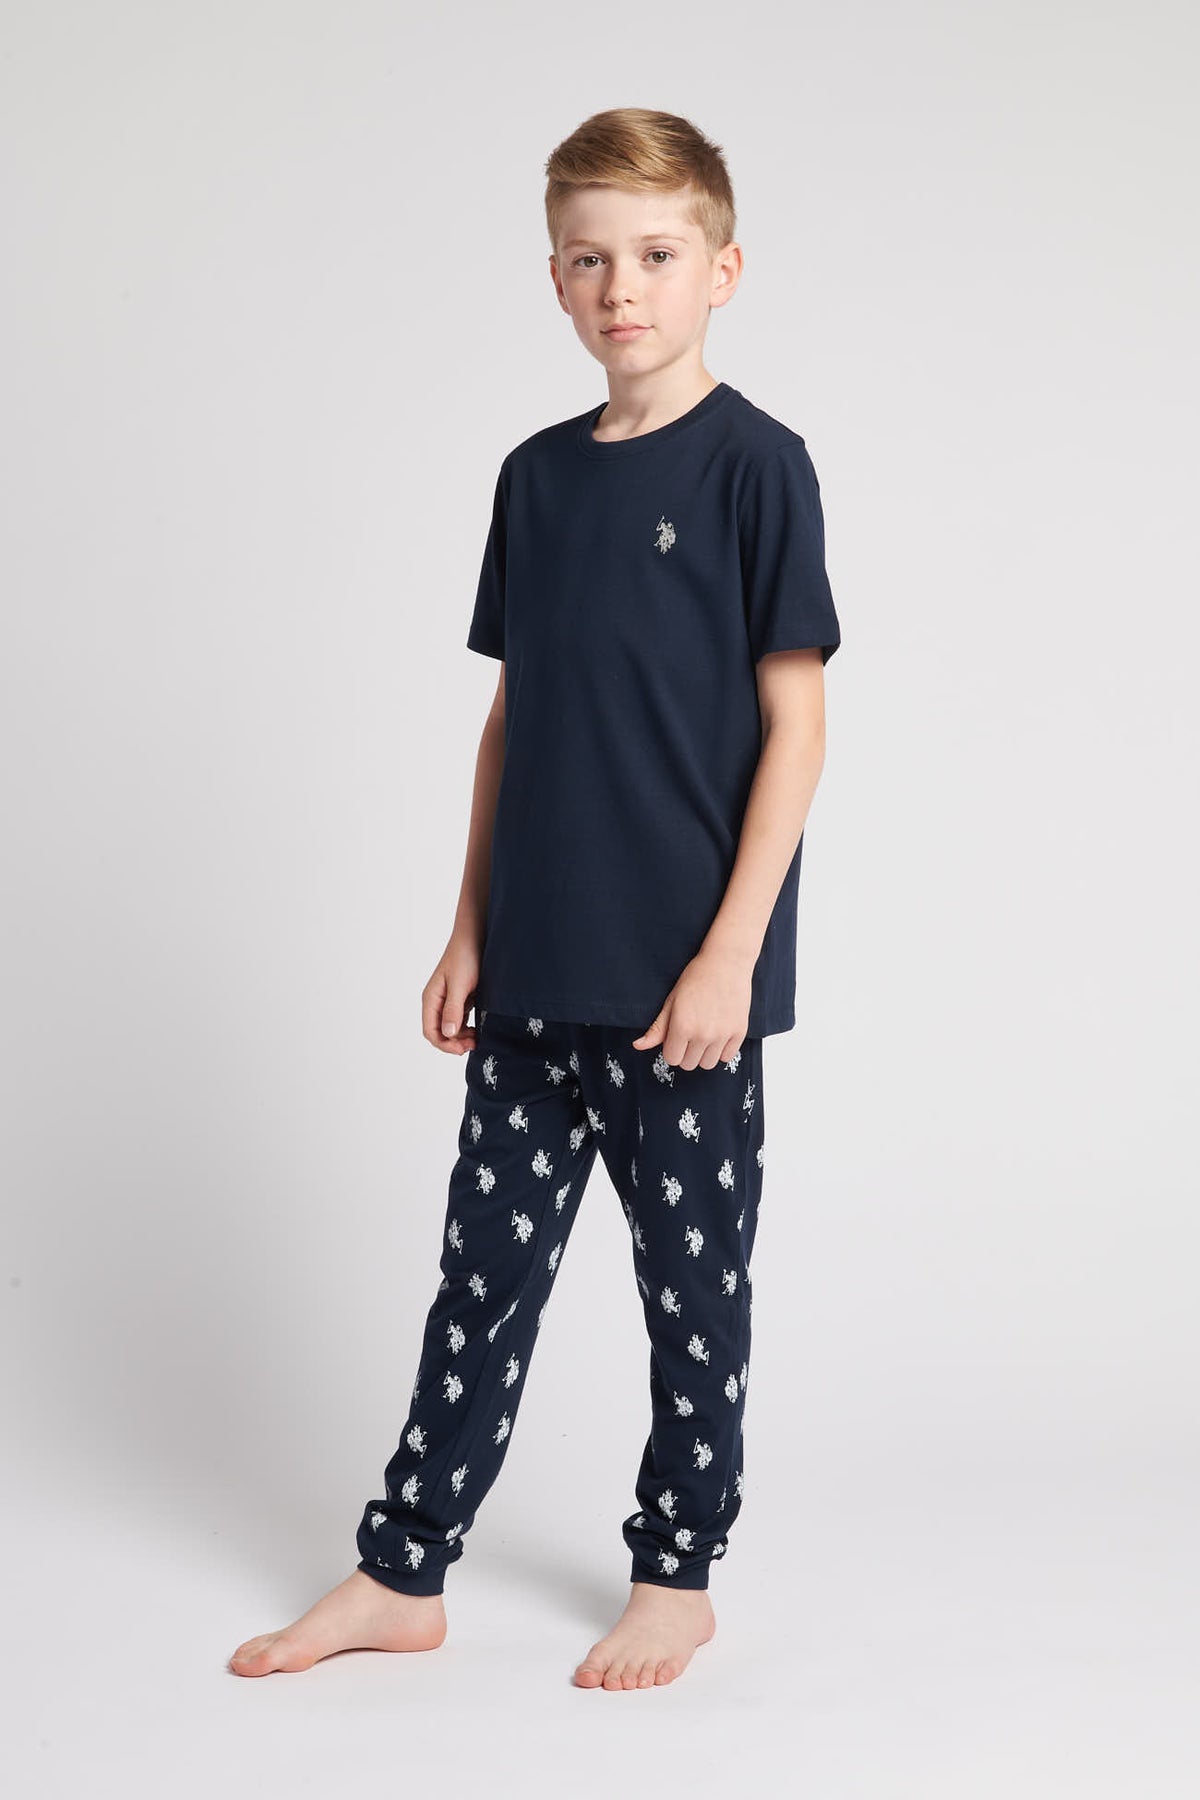 Boys 2 Pack Lounge T-Shirts in Navy Blue